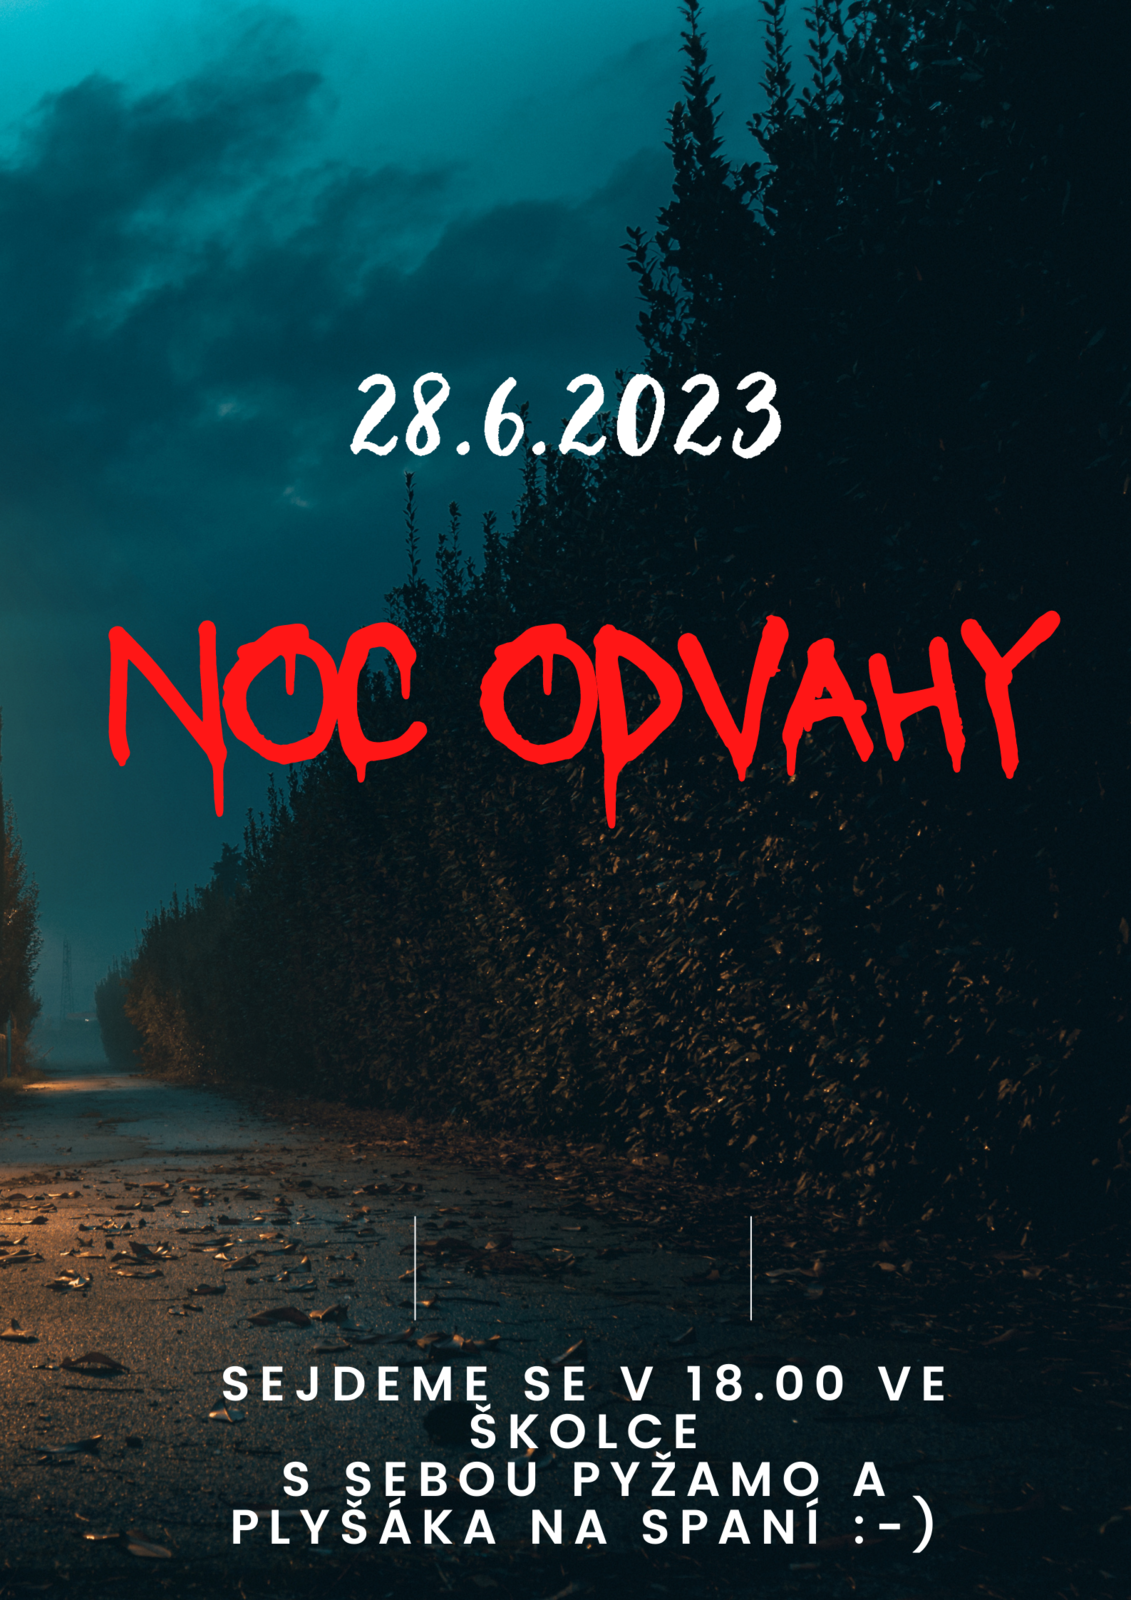 Noc odvahy.png